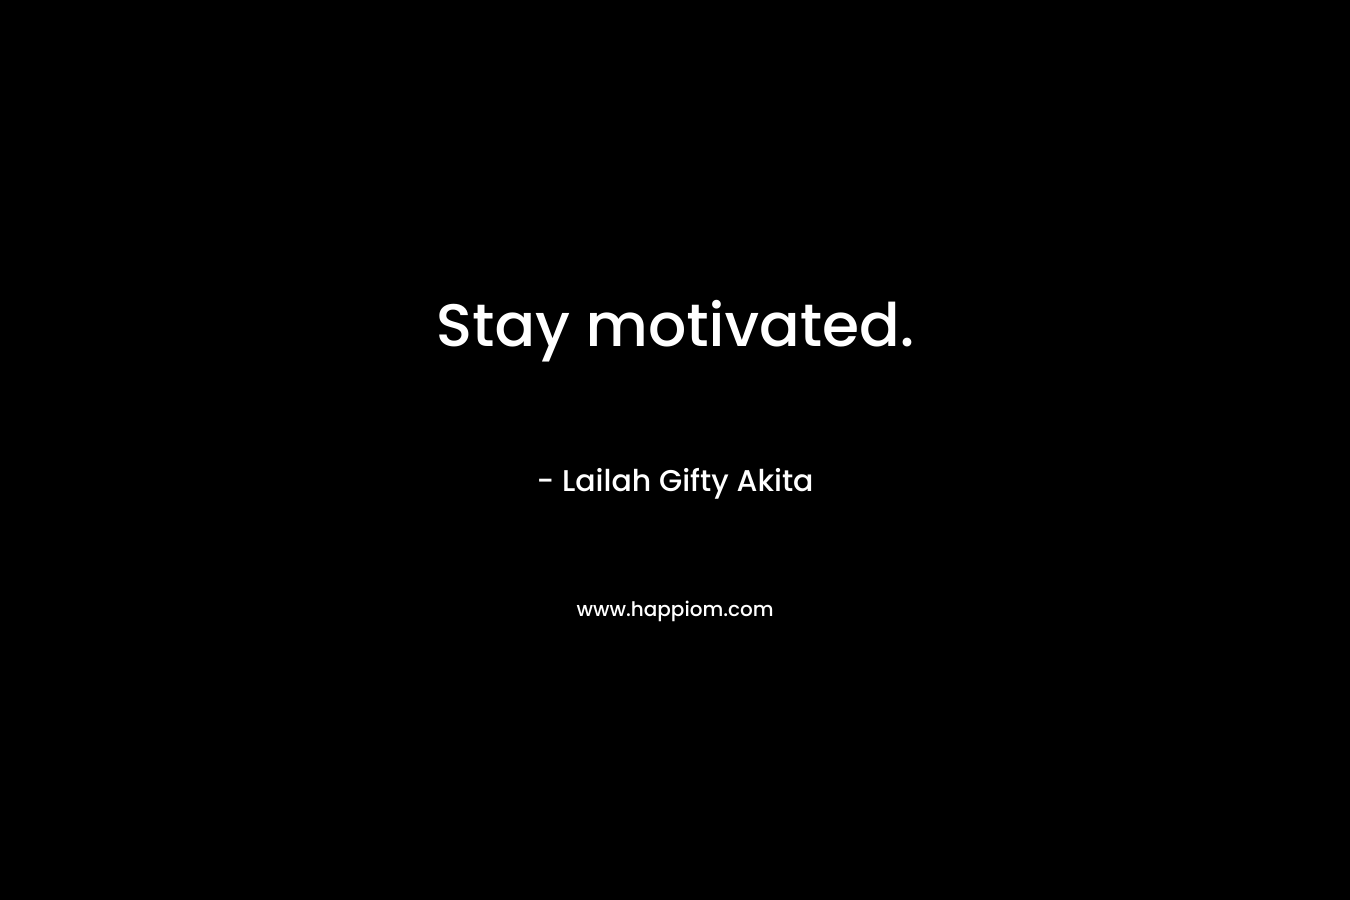 Stay motivated.